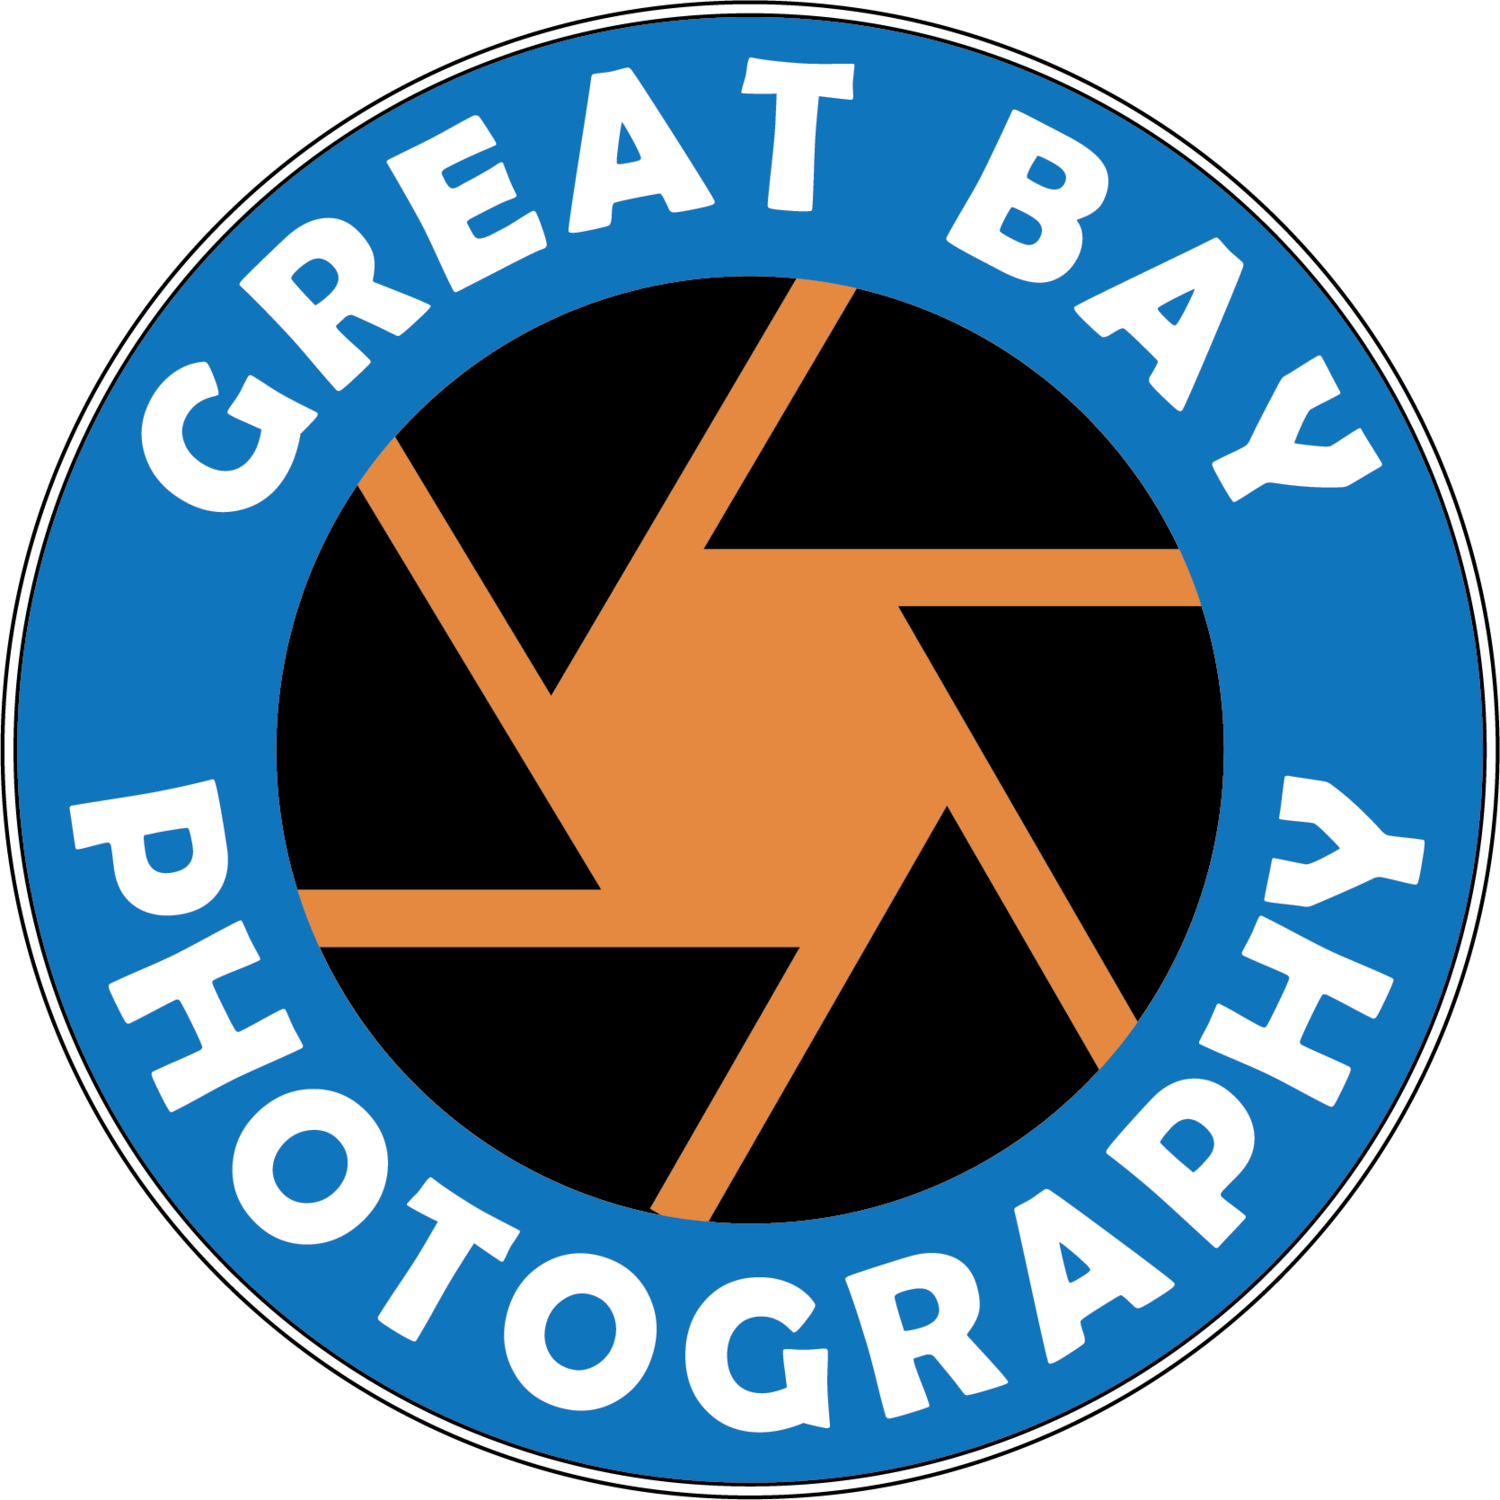 Real Estate Photography - Great Bay Photography, Serving the New Hampshire Seacoast and Southern Maine